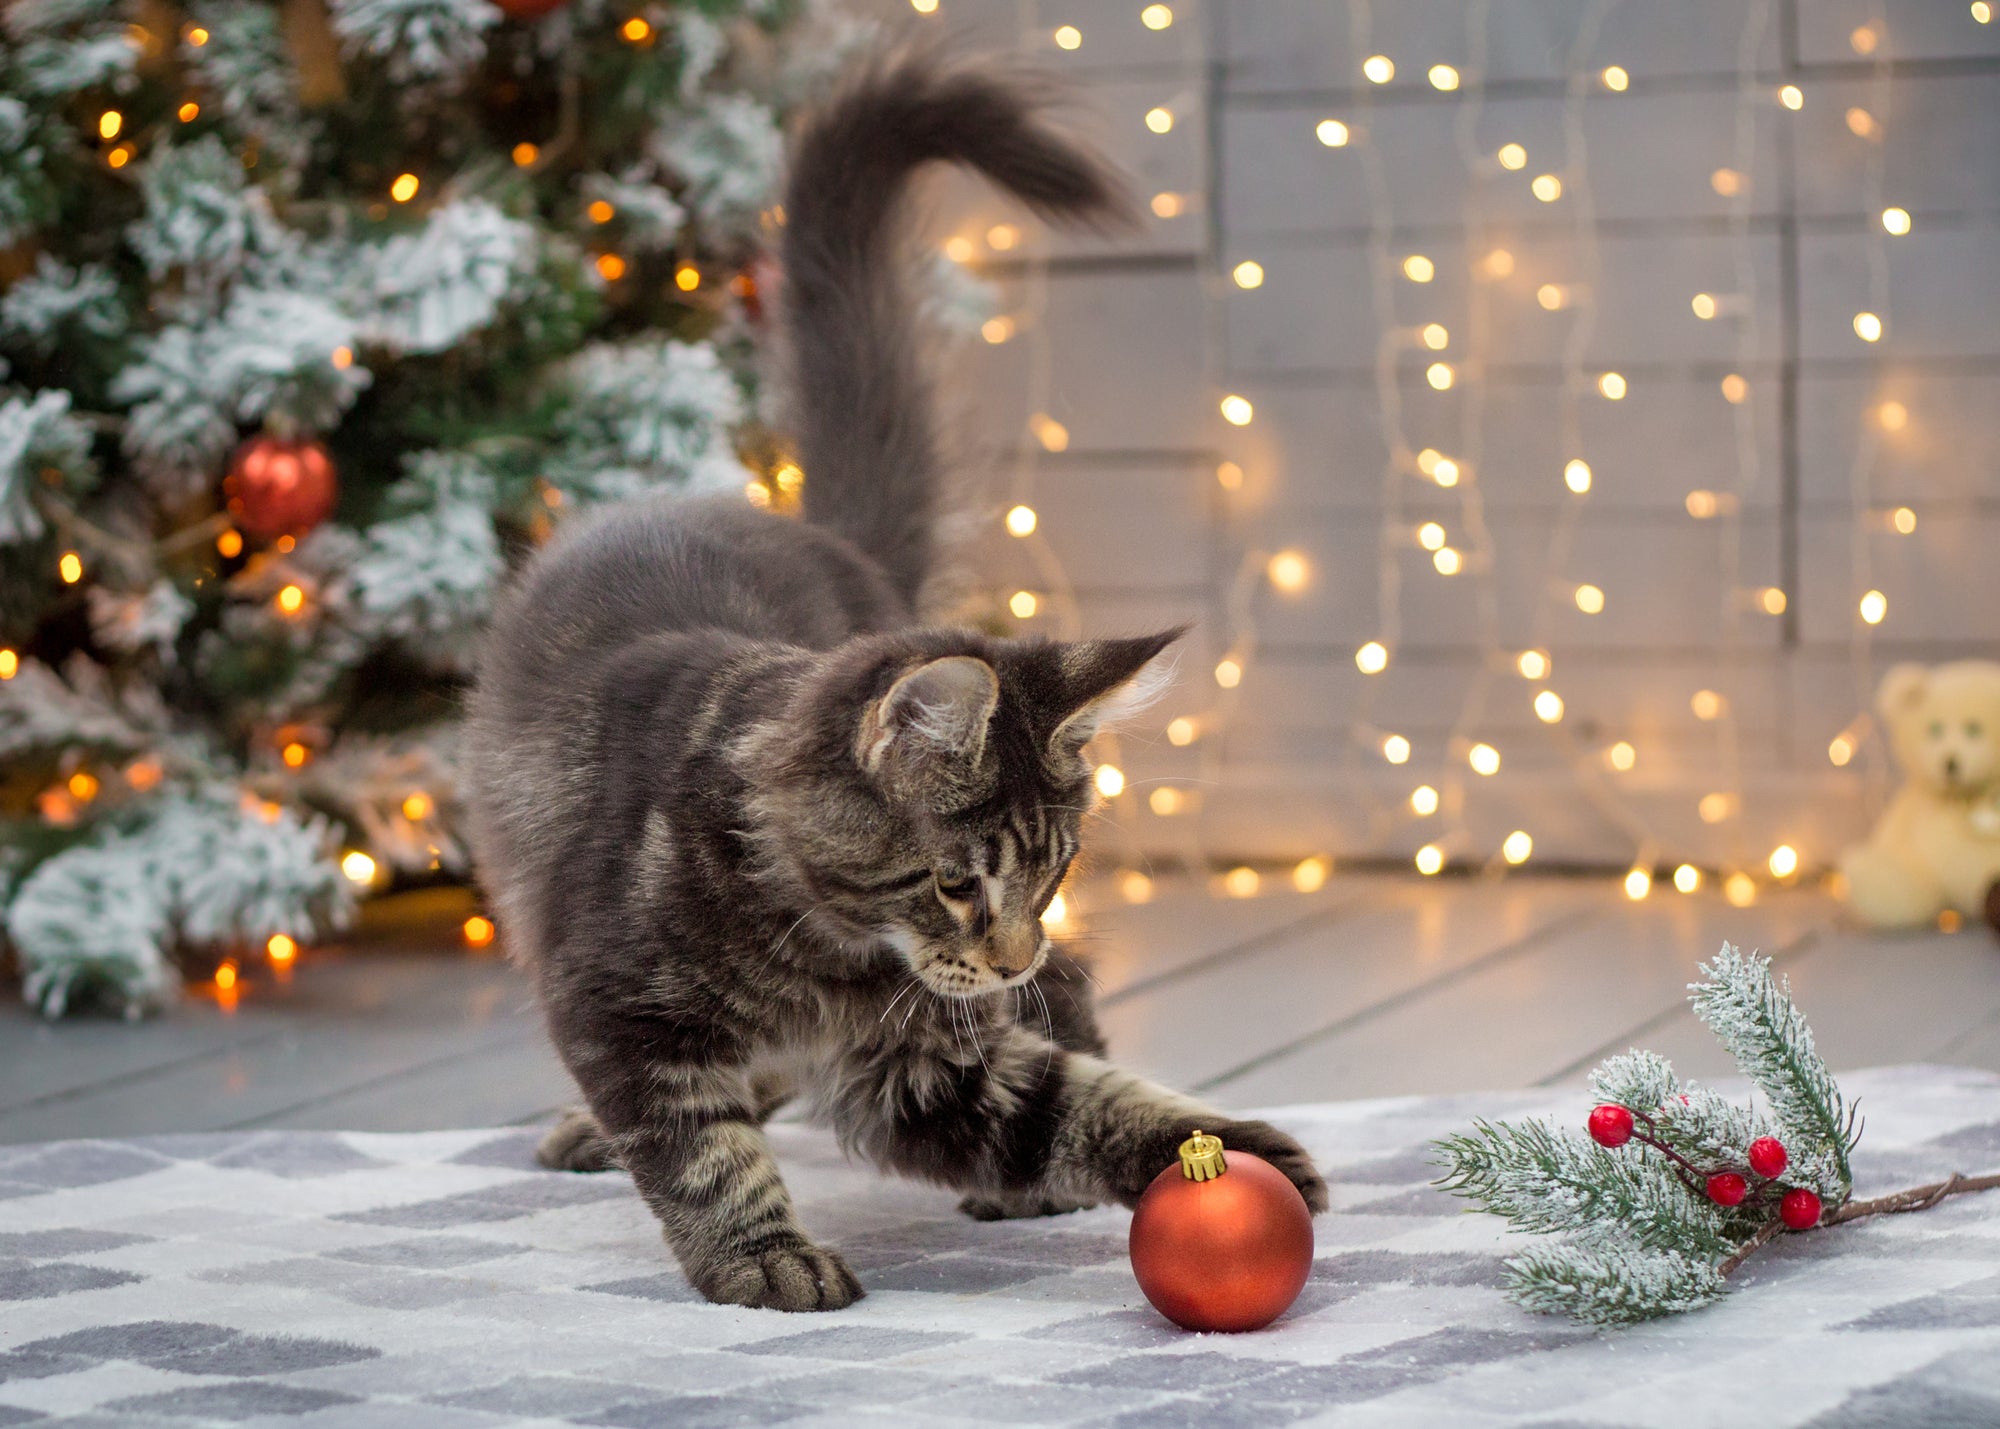 A cat playing with a Christmas ornament near a tree.